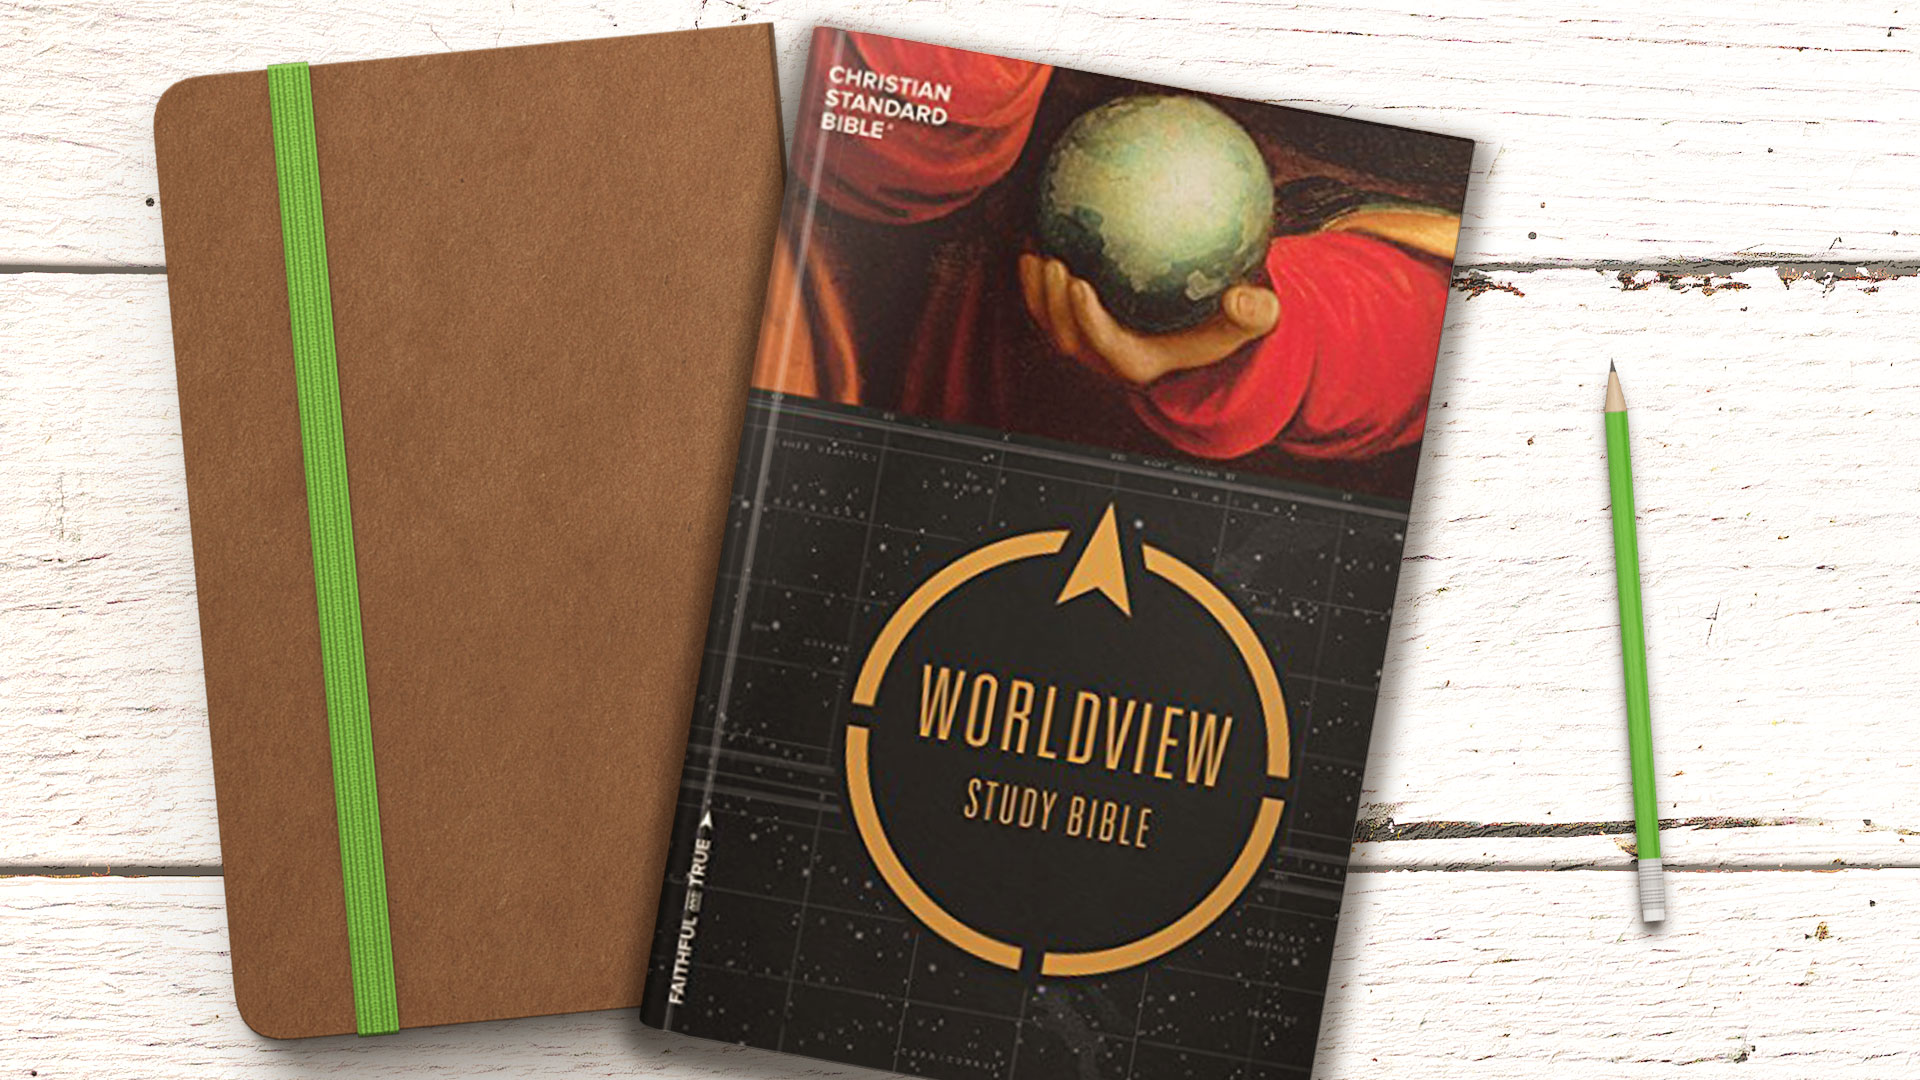 CSB Worldview Study Bible Bible and Intellectual pursuit